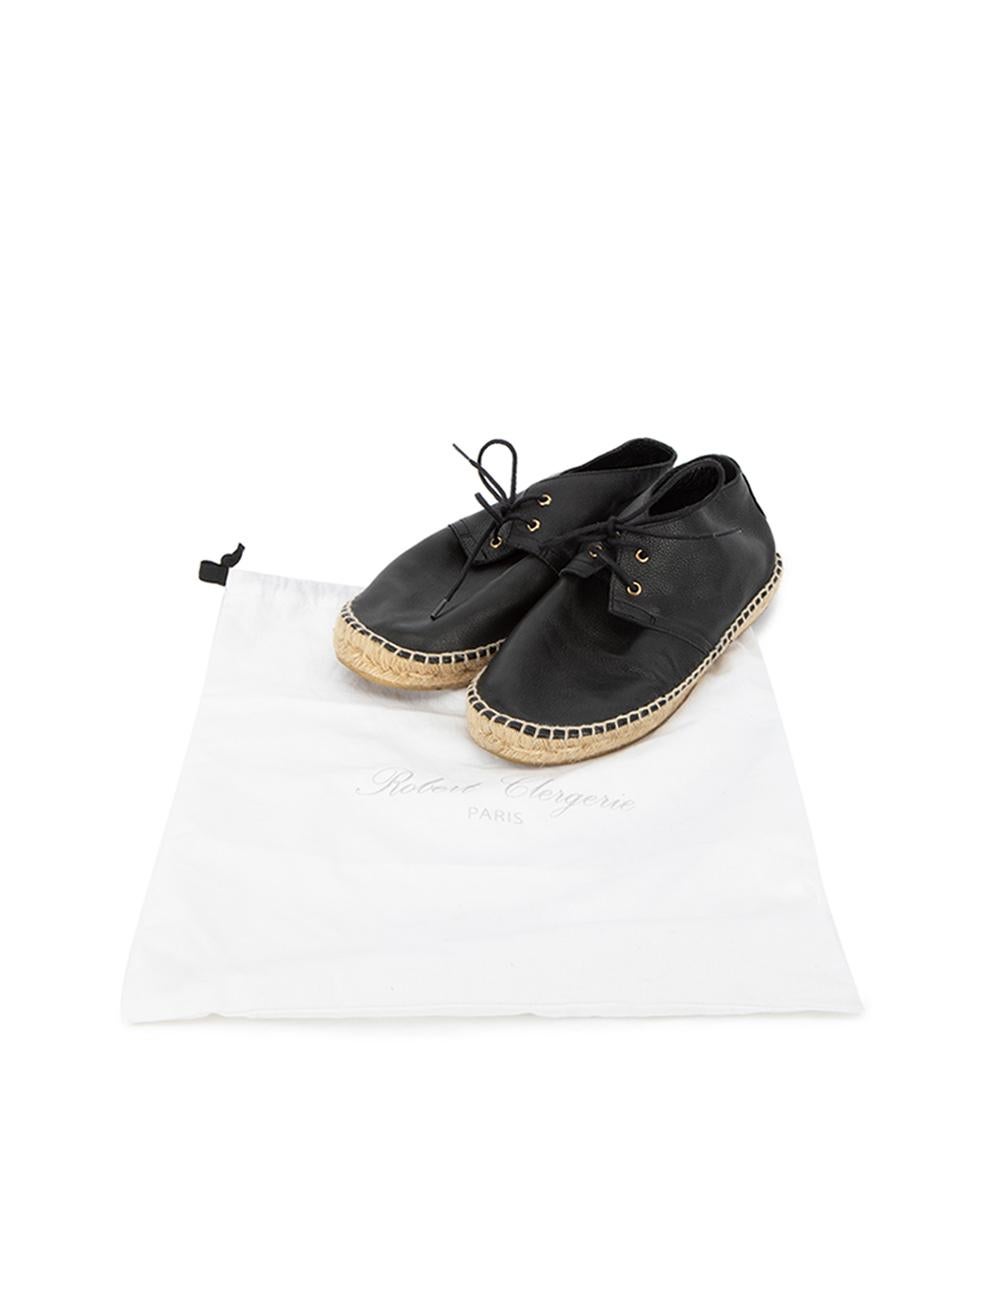 Clergerie Women's Robert Clergerie Black Leather Espadrilles For Sale 2